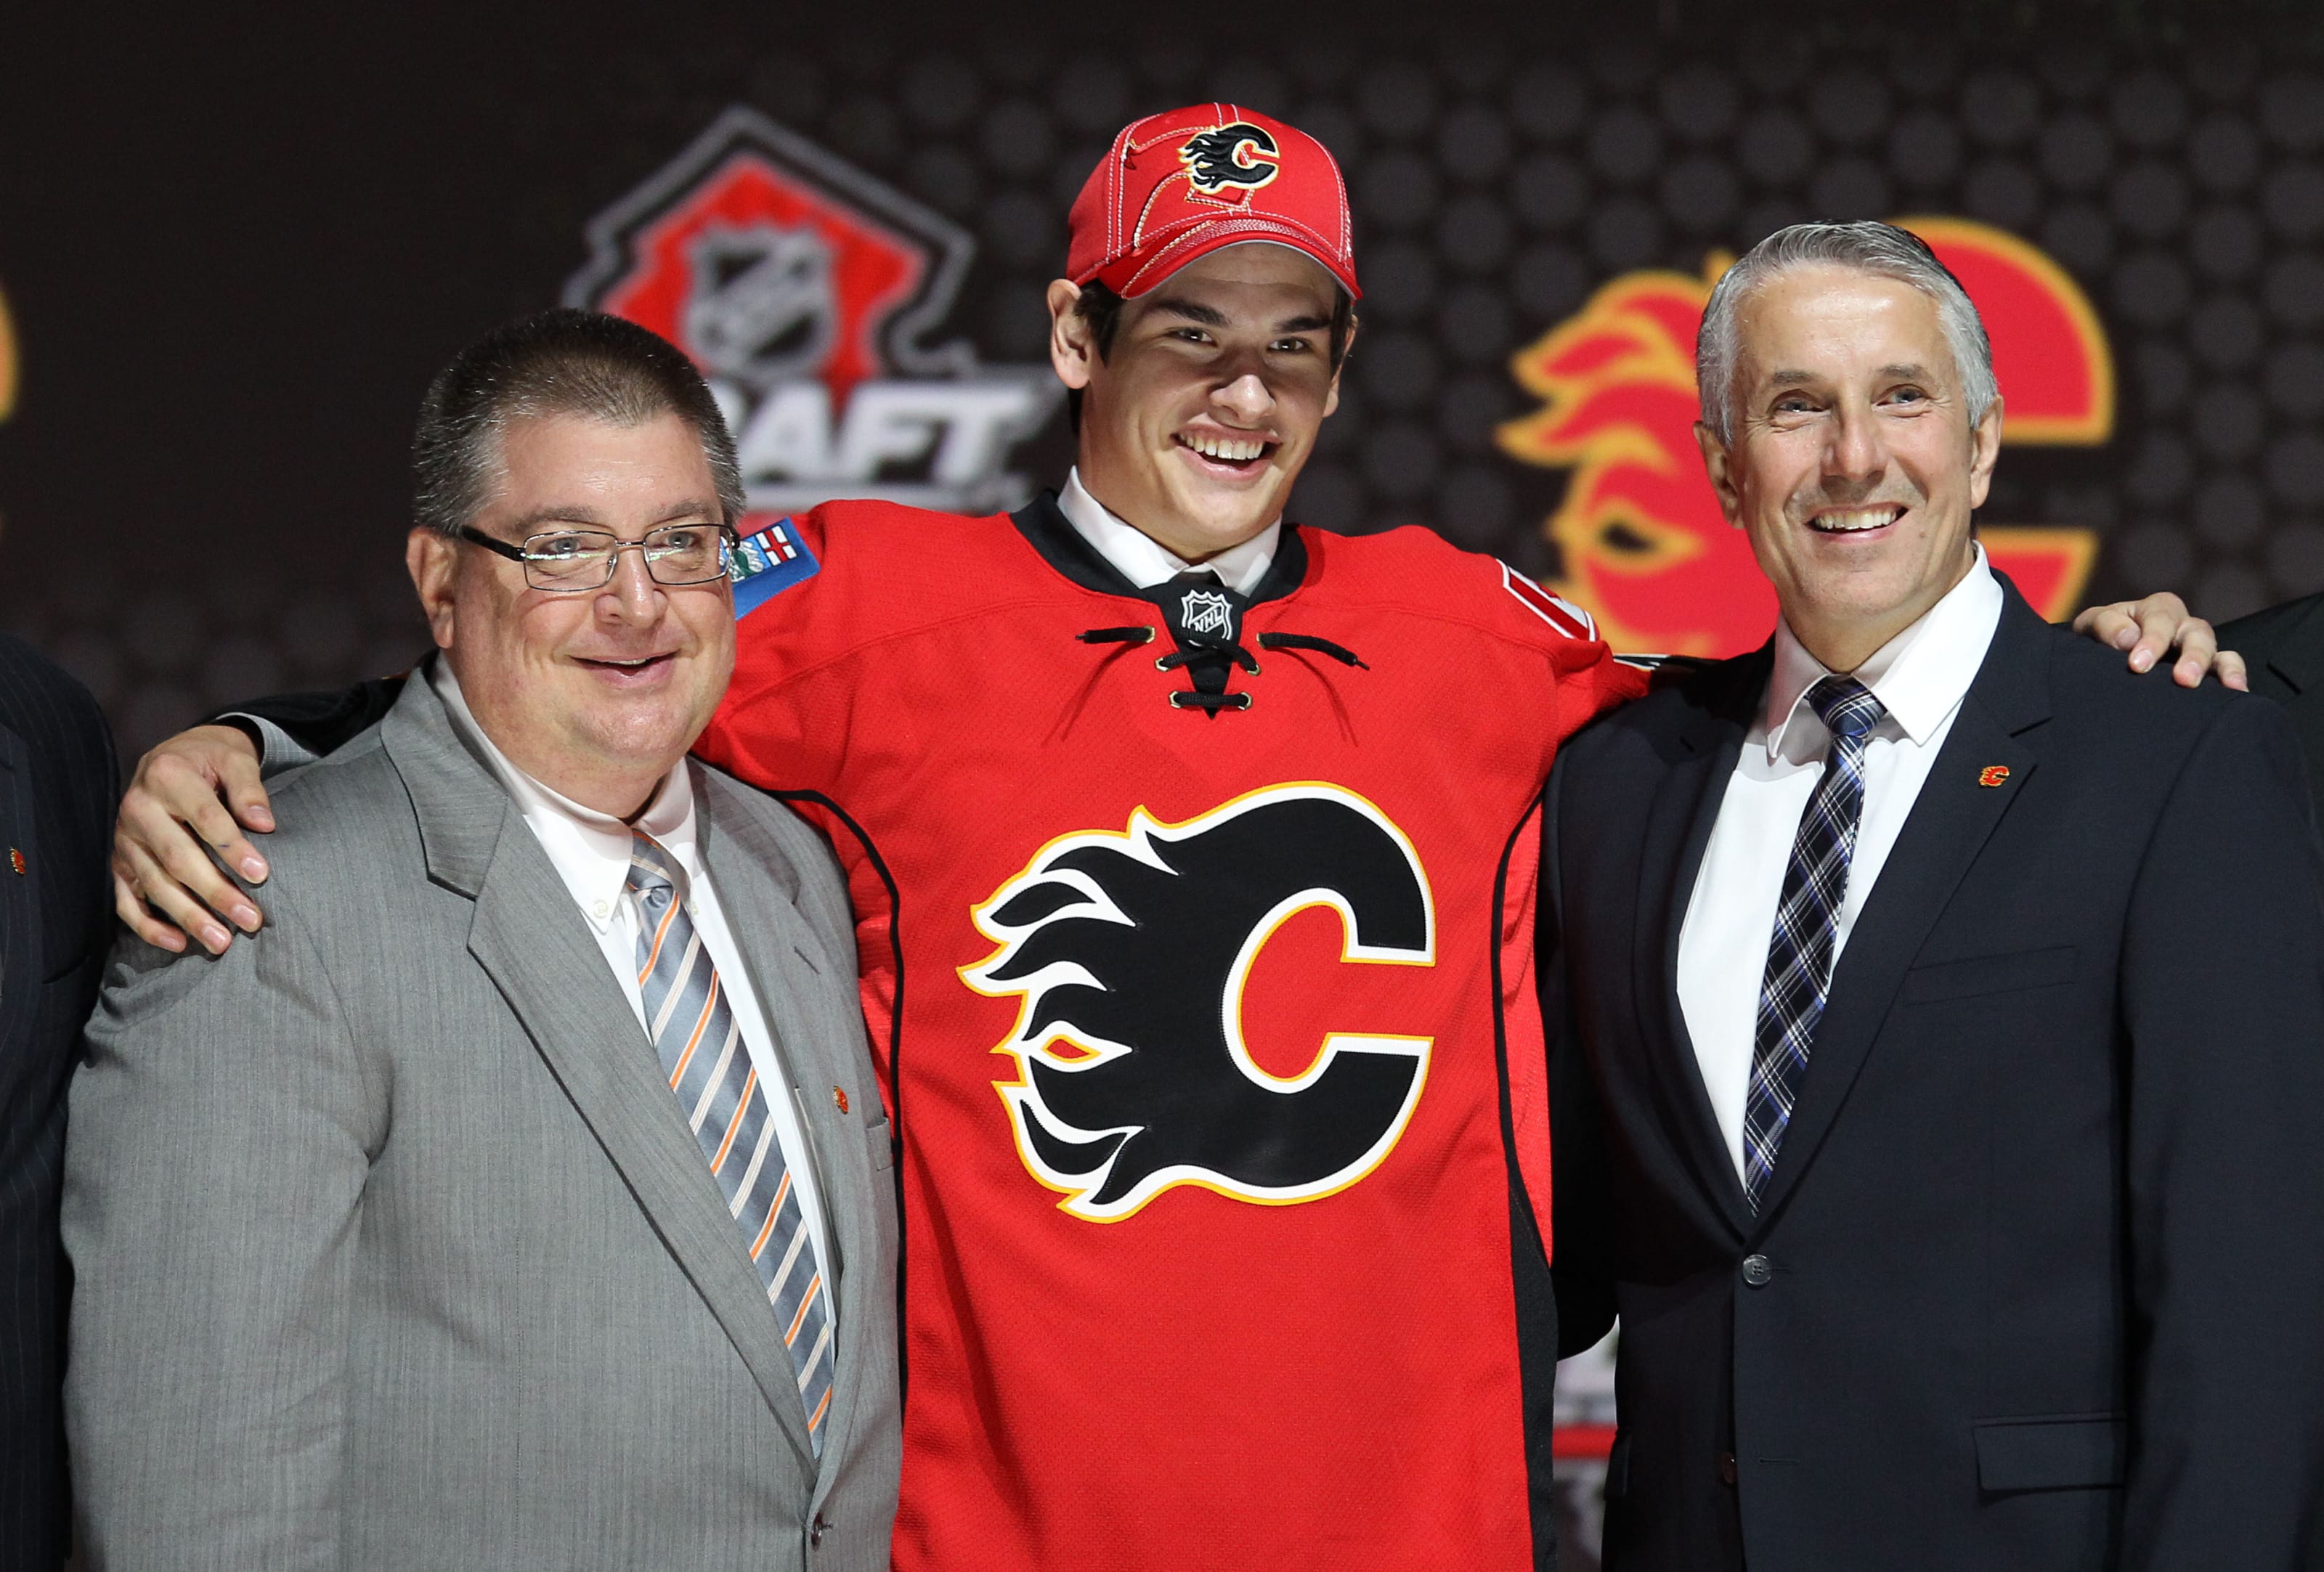 He was loved here': How Sean Monahan built an enduring legacy in